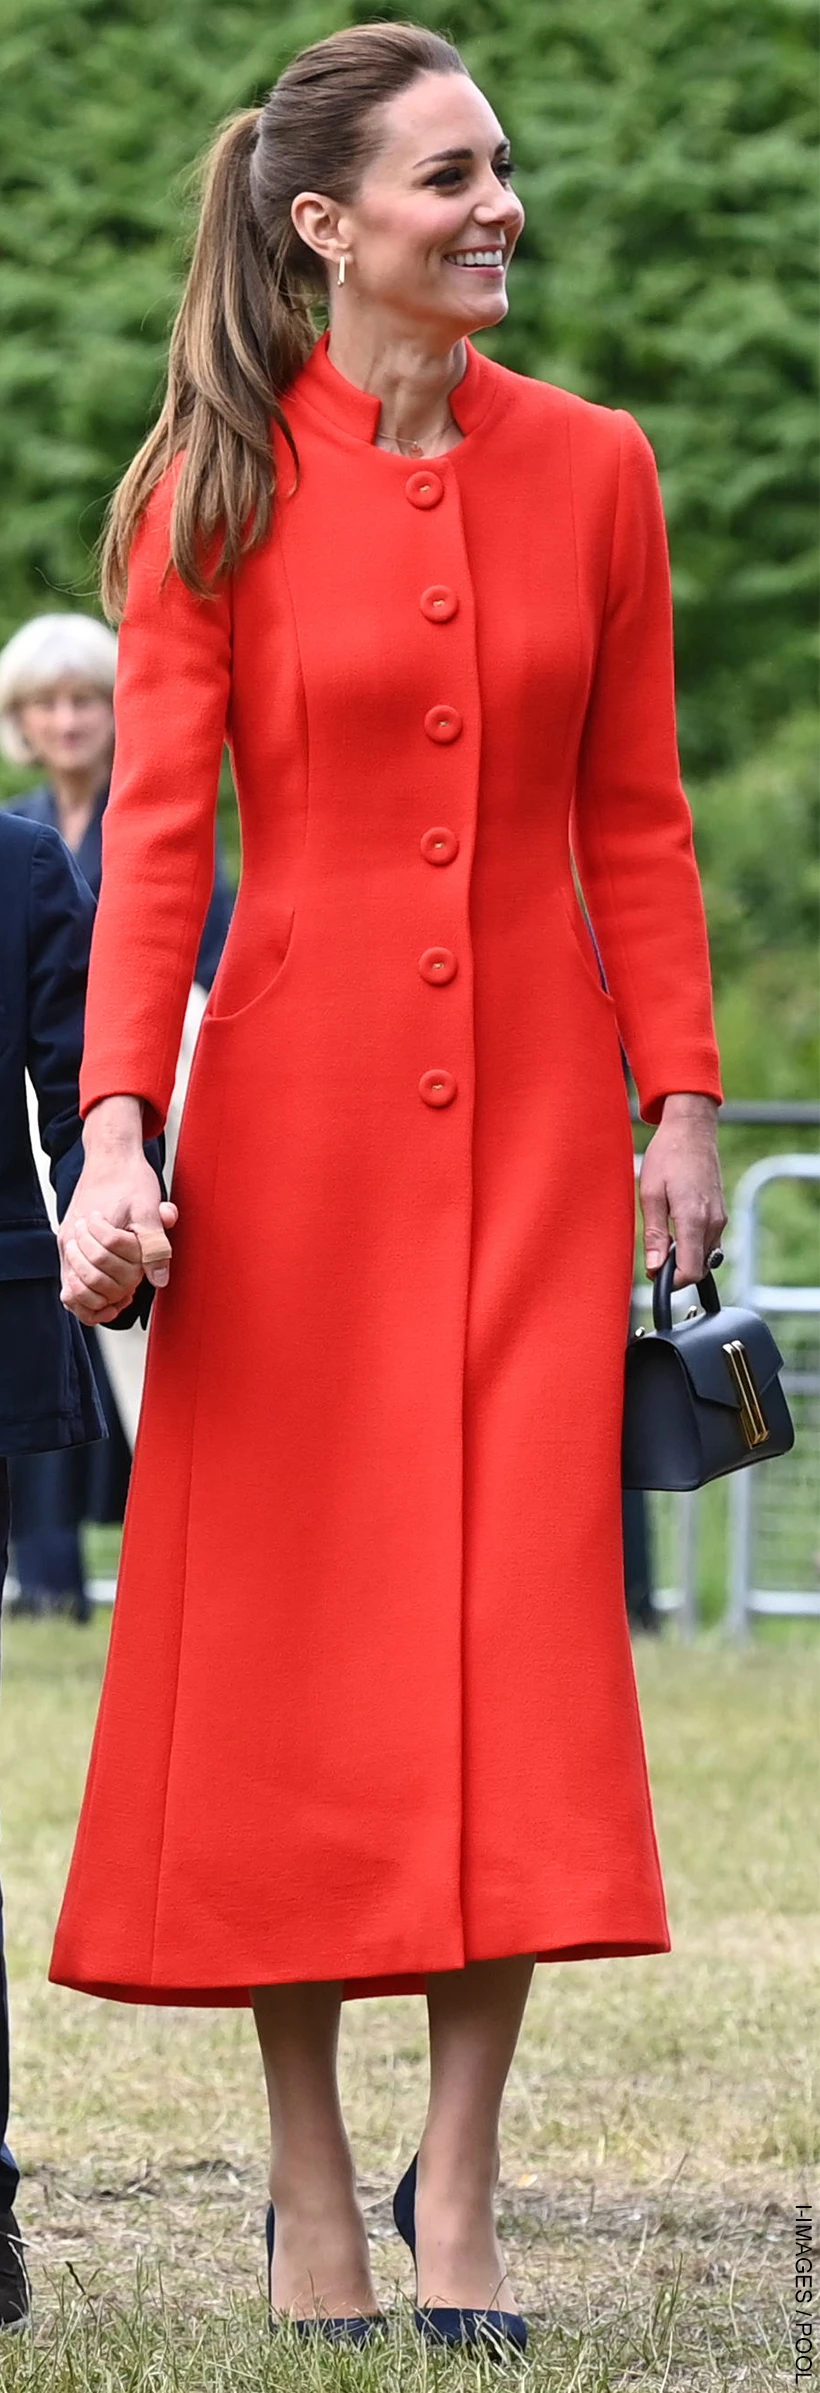 Kate Middleton's Strathberry Multrees Chain Wallet in Navy Embossed Croc